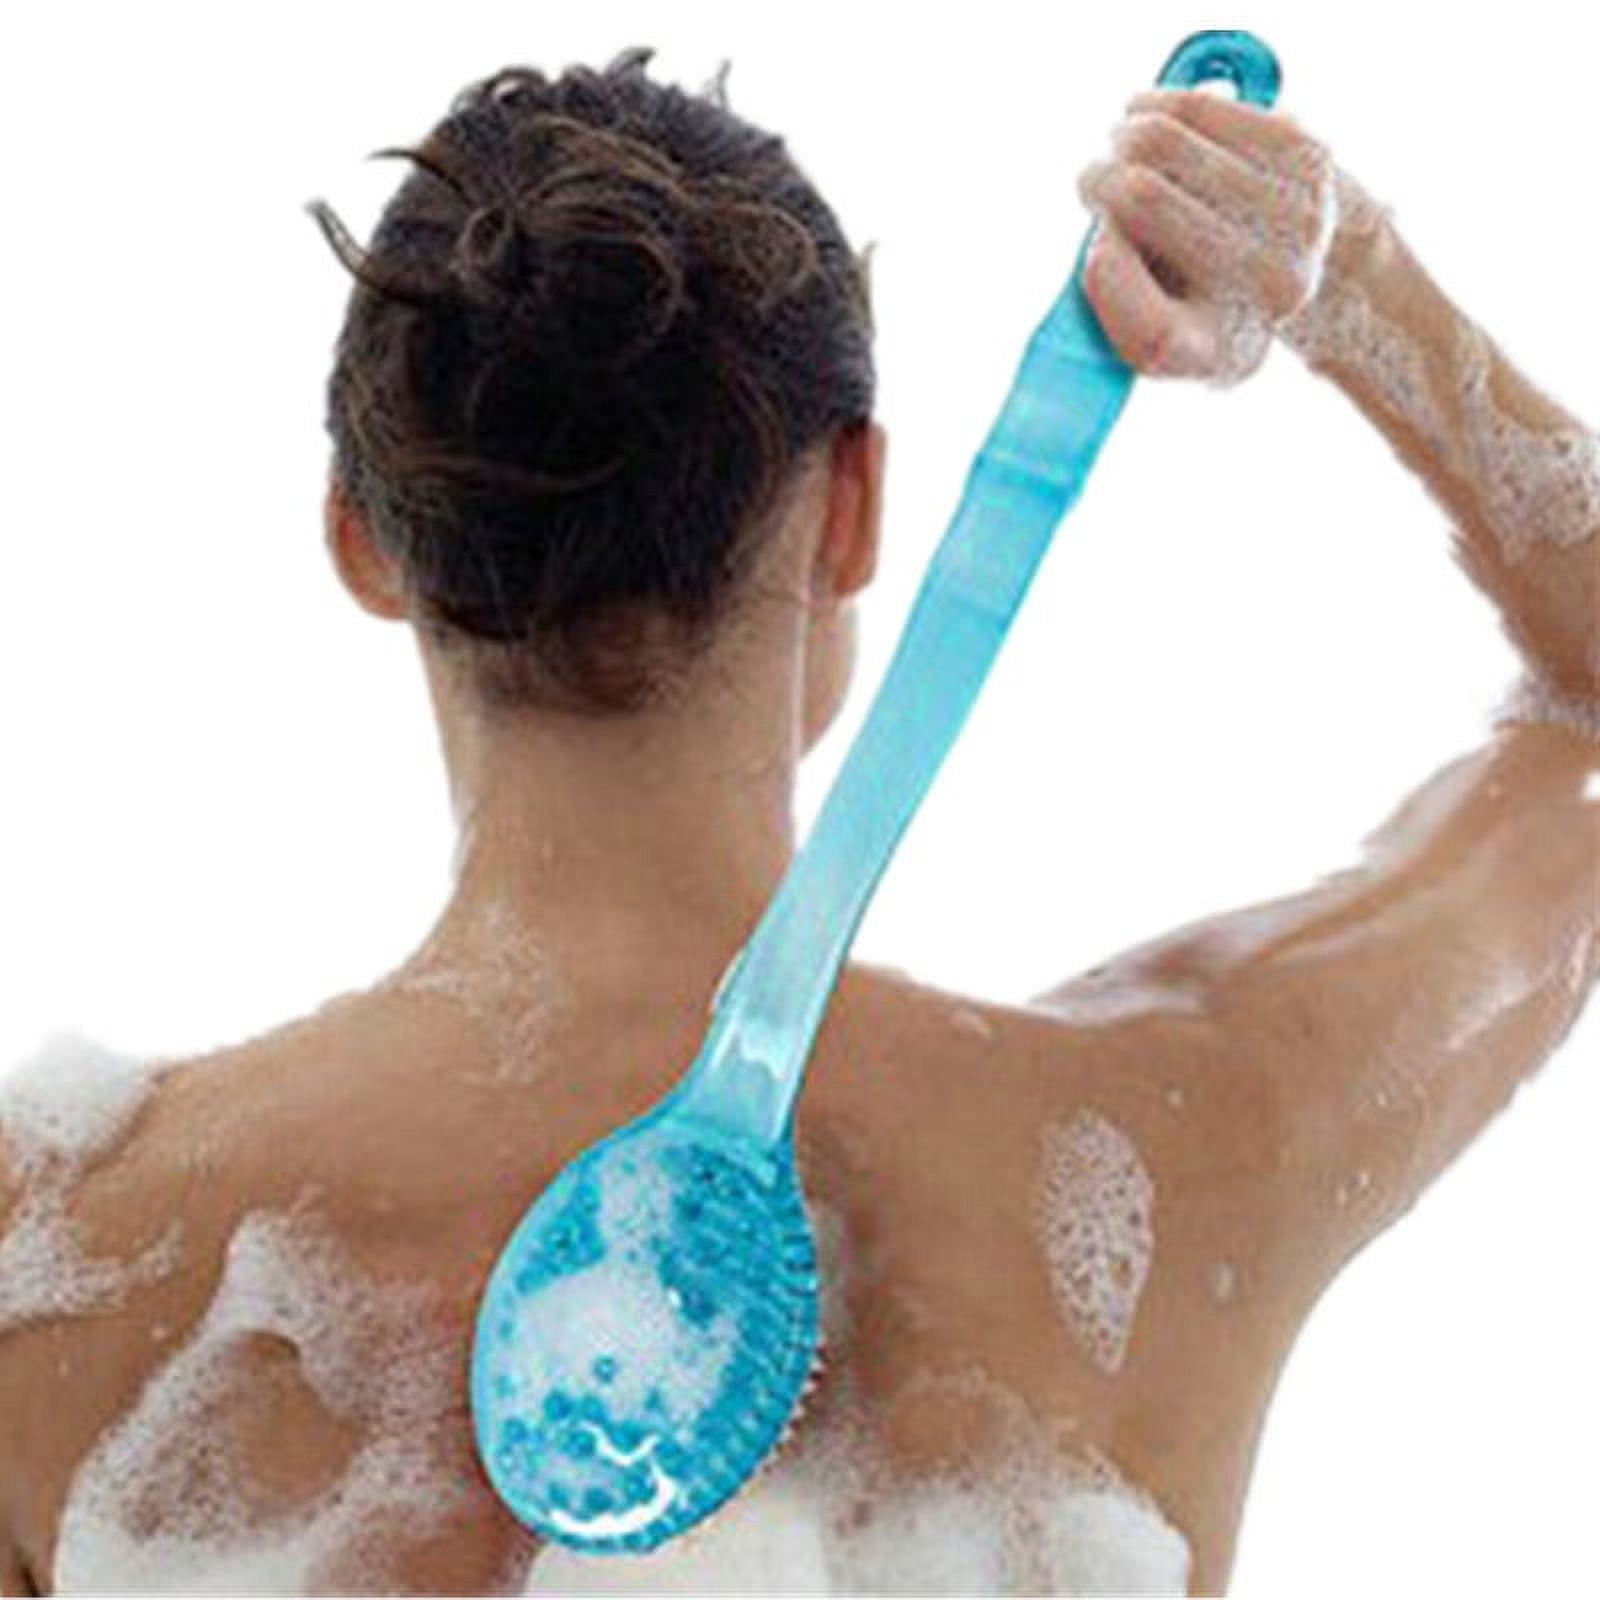 Vive Back Scrubber Brush for Shower - for Dry or Wet Body Brushing - Long  Handle - Cleaning Lymphatic Drainage Handled Washer for Men Women -  Showering Bathing Exfoliator with Soft 